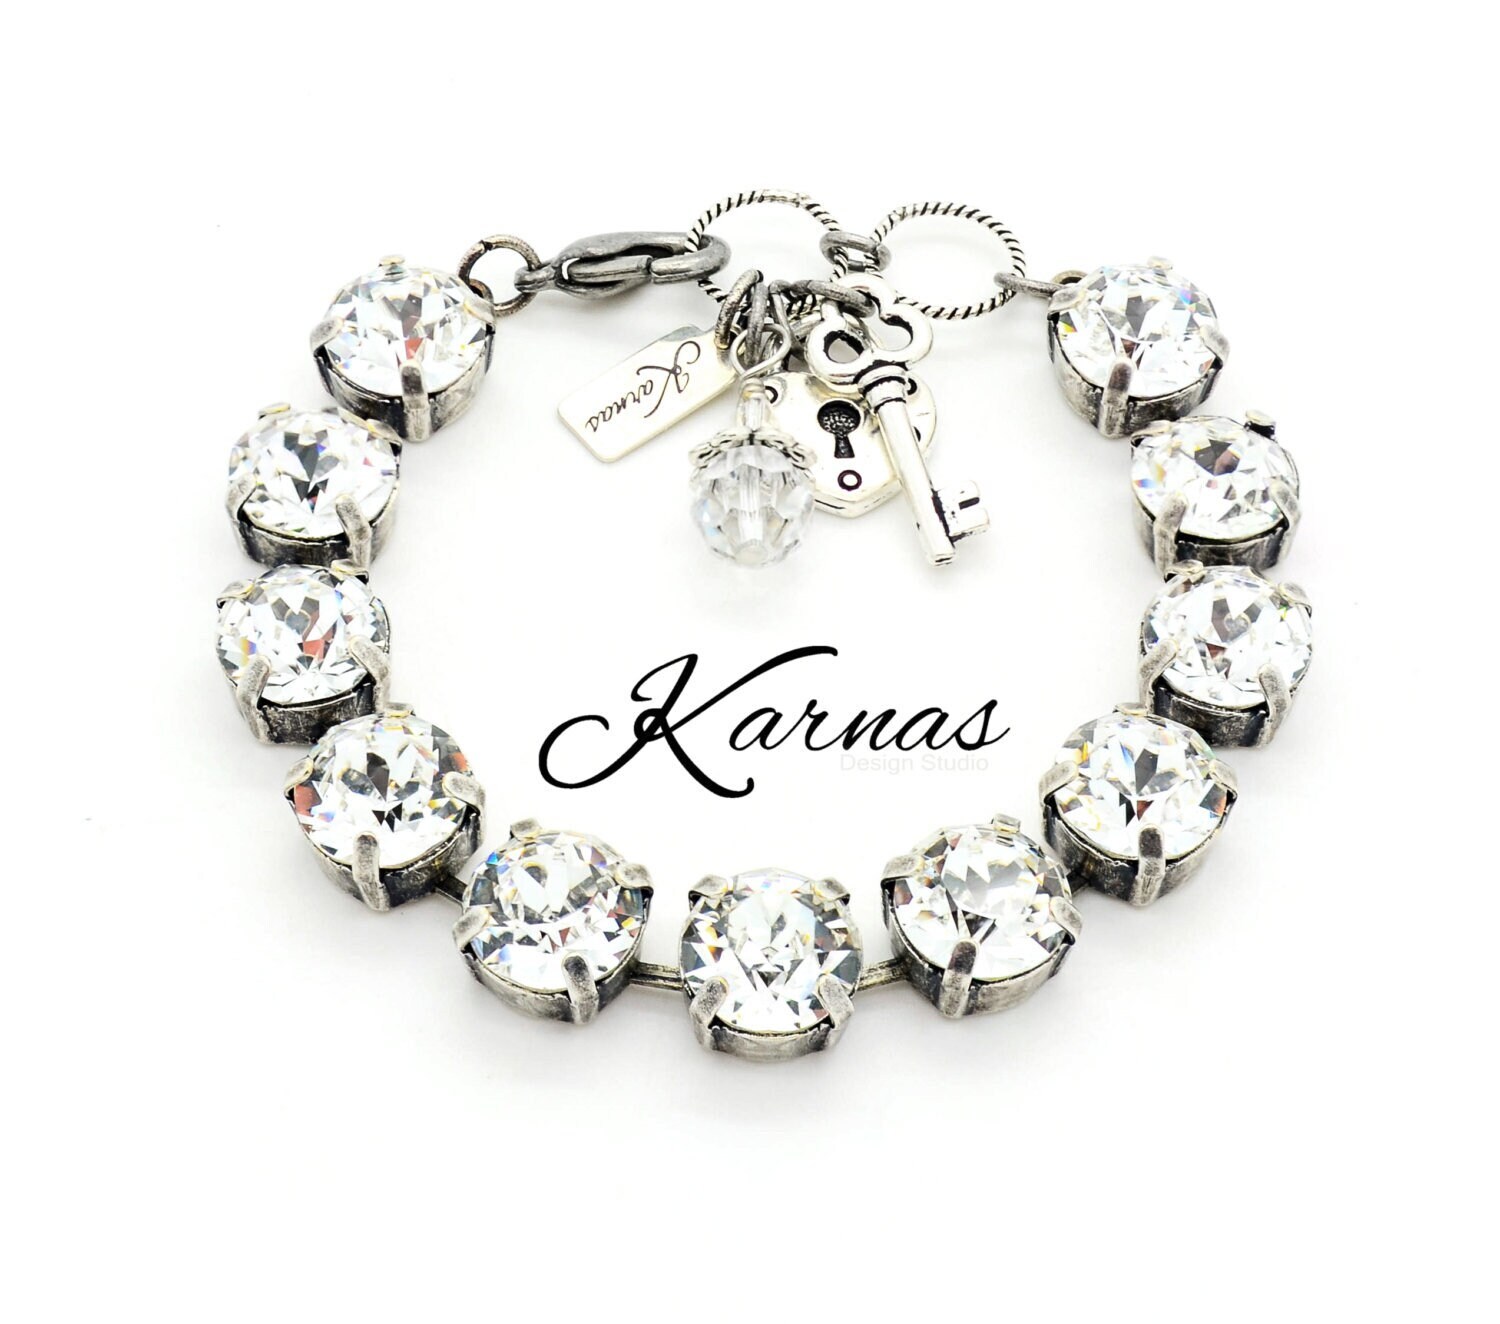 Crystal Clear 10mm Charm Bracelet Made With K.d.s. Premium Crystal Karnas Design Studio Choose Your Finish Free Shipping